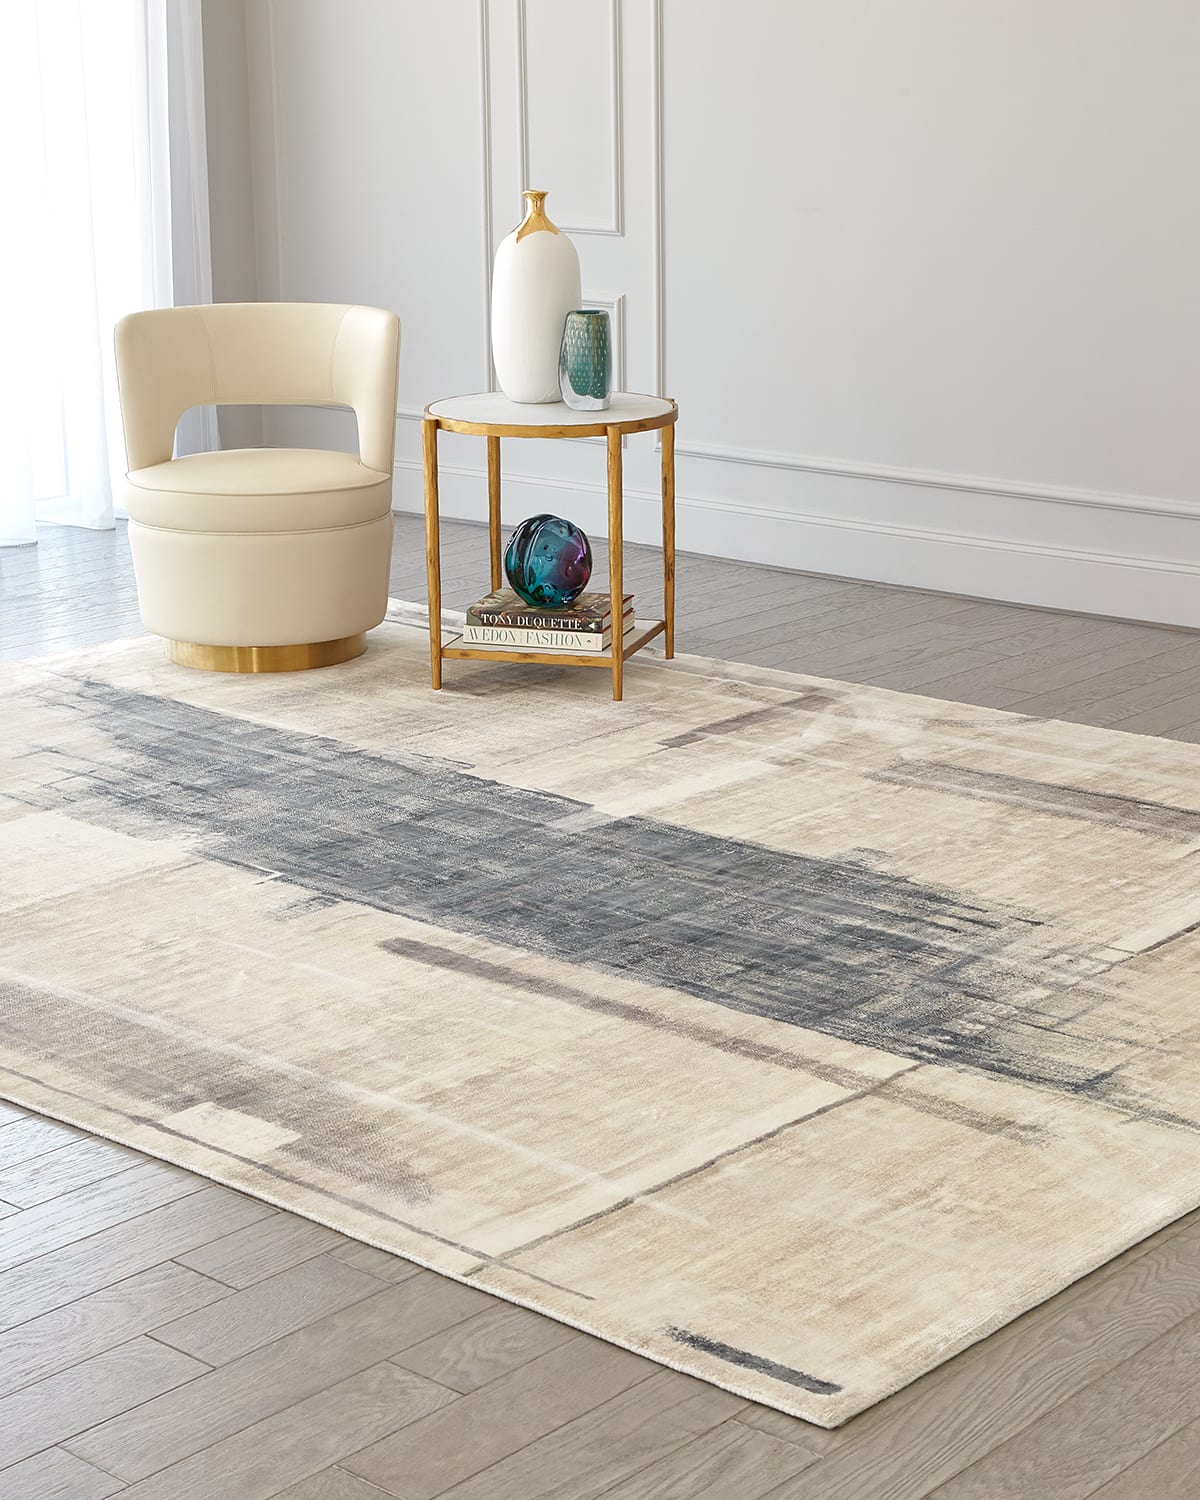 George Sellers For Global Views Art Hand-woven Rug, 5' X 8' In Gray